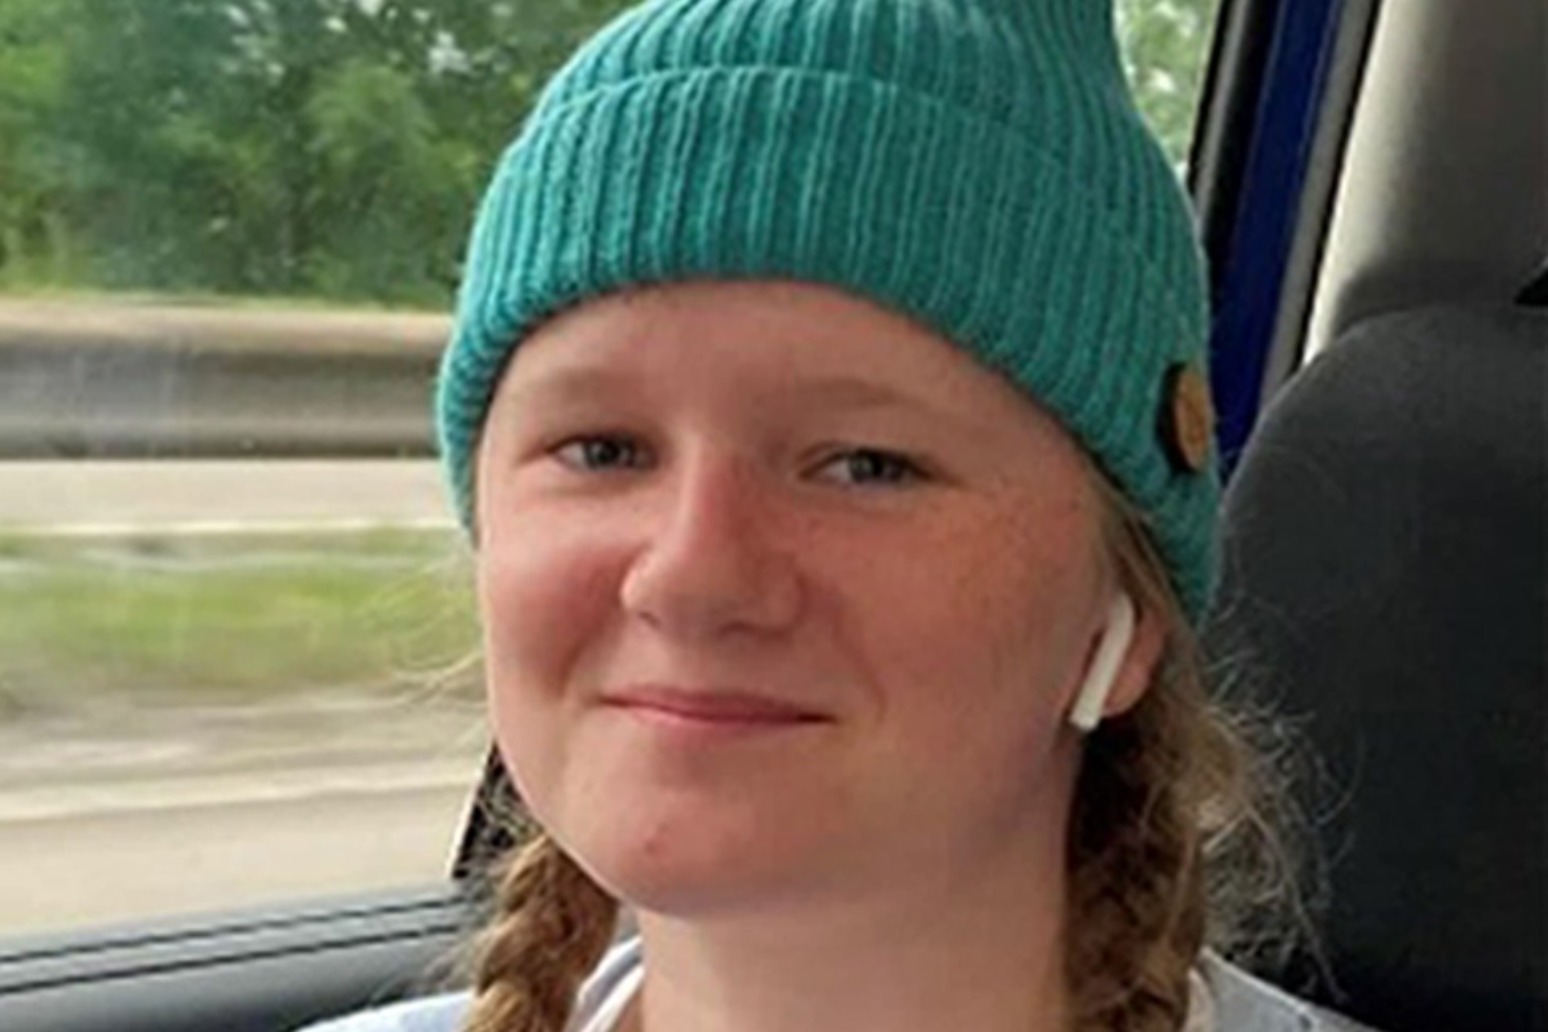 15 year old girl who died in M53 school bus crash named 